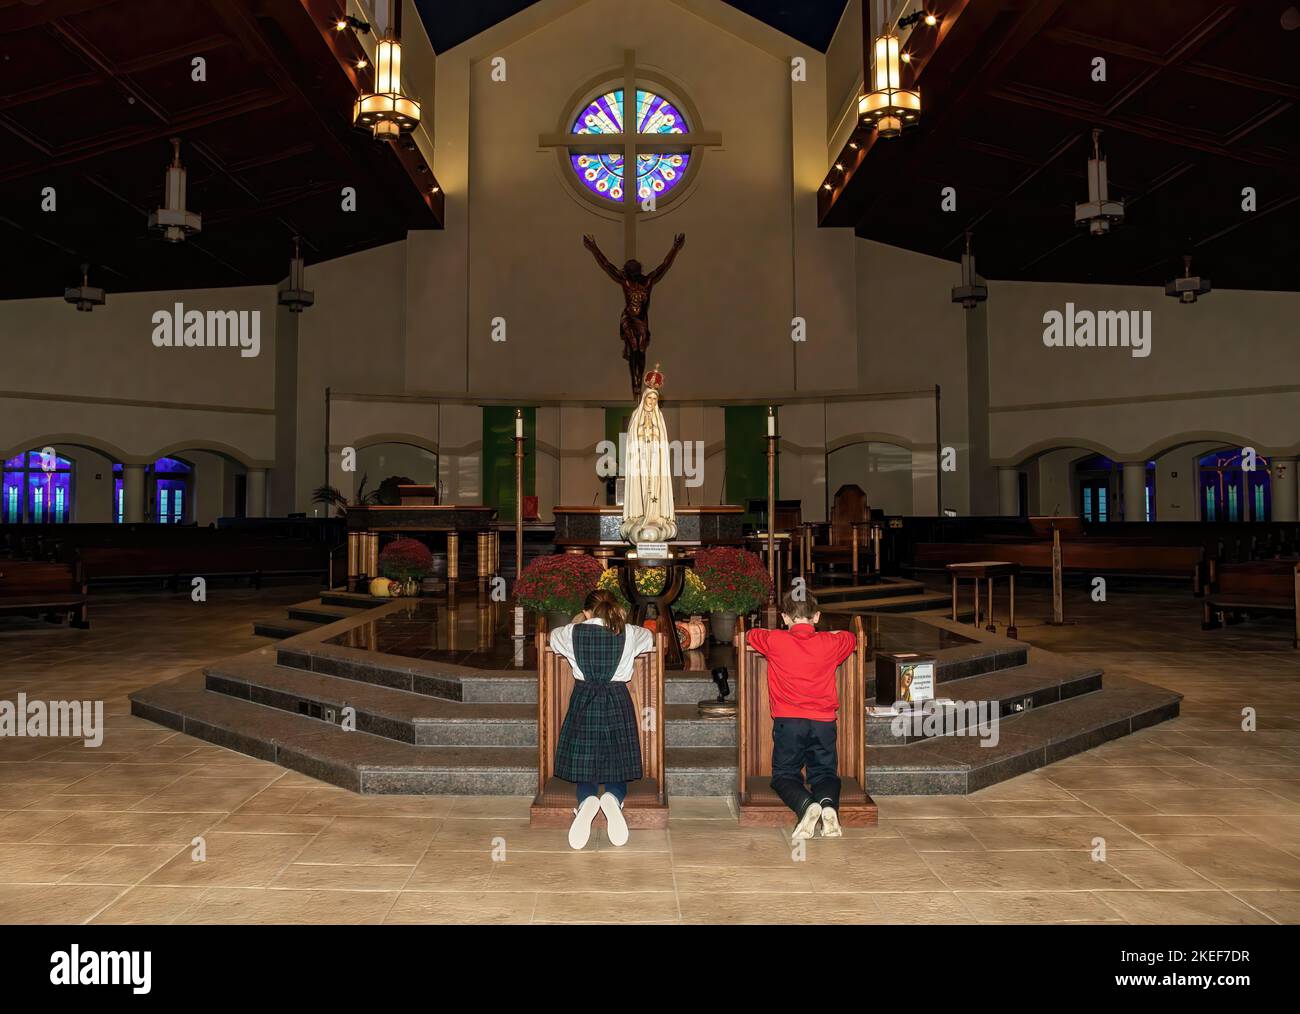 Two St. Ambrose Catholic School students kneeling in veneration before the traveling statue of Our Lady of Fatima at St. Ambrose Catholic Church. Stock Photo